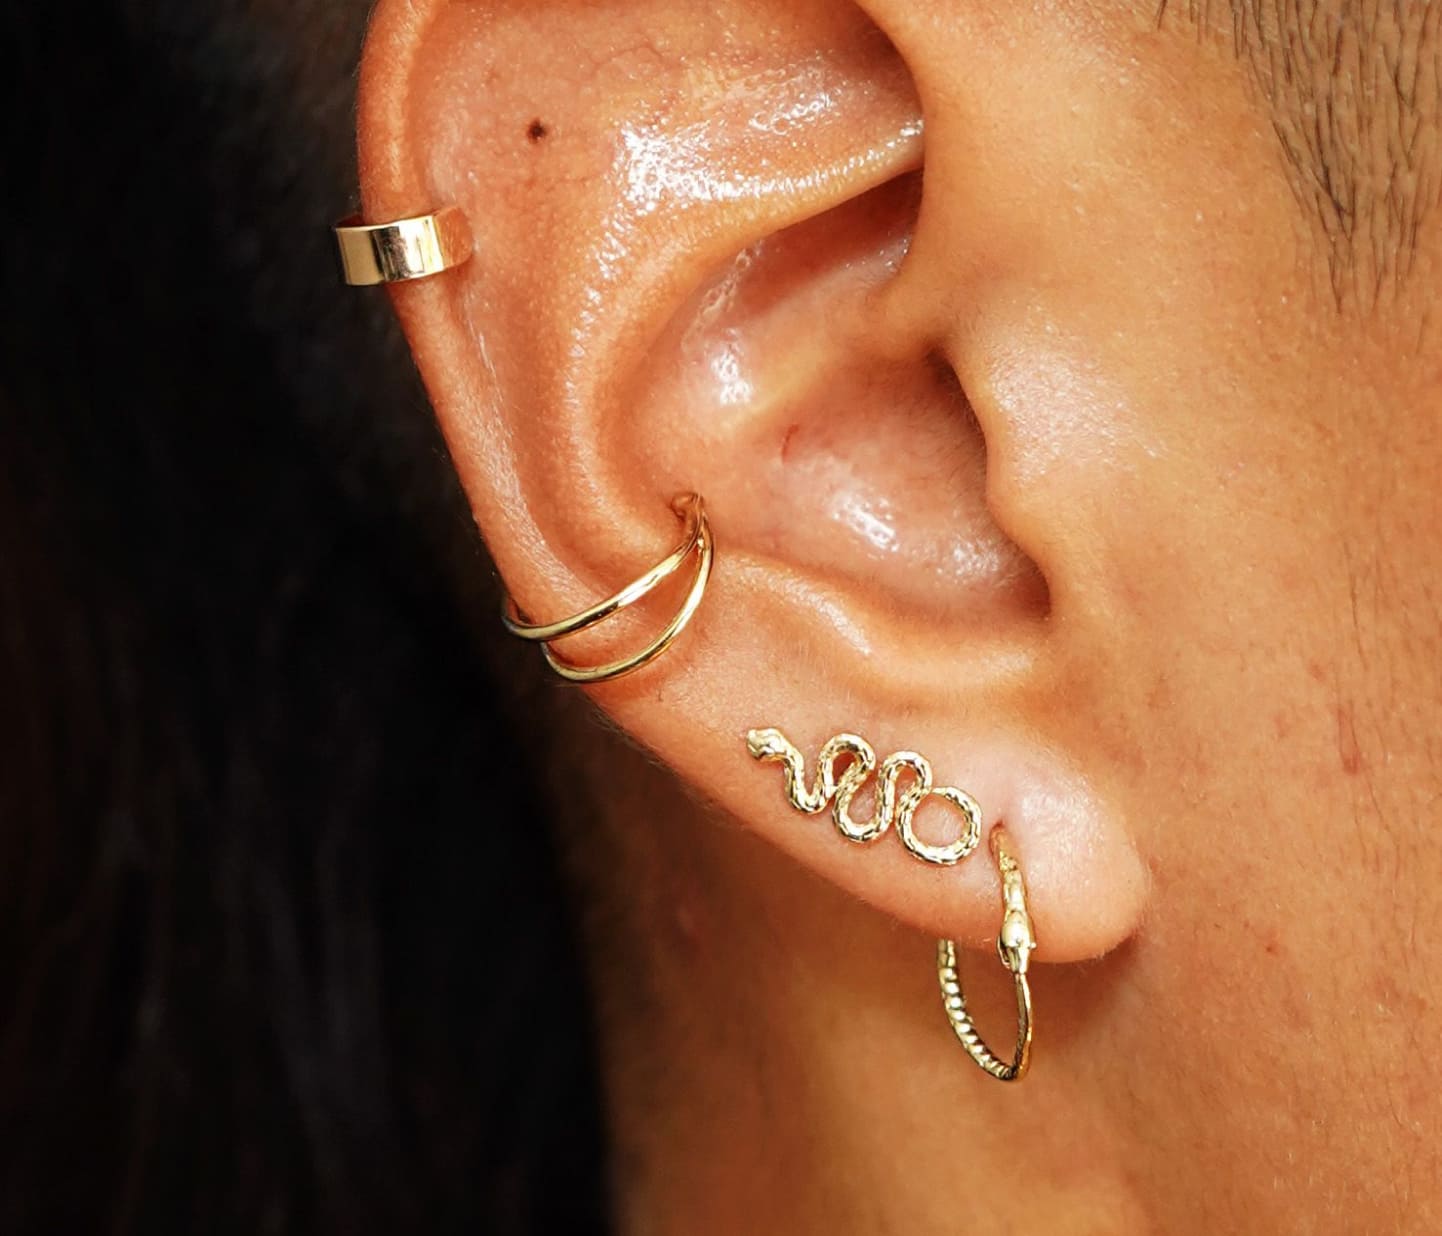 Close up view of a model's ear wearing a Snake Hoop, Snake Earring, and two yellow gold ear cuffs